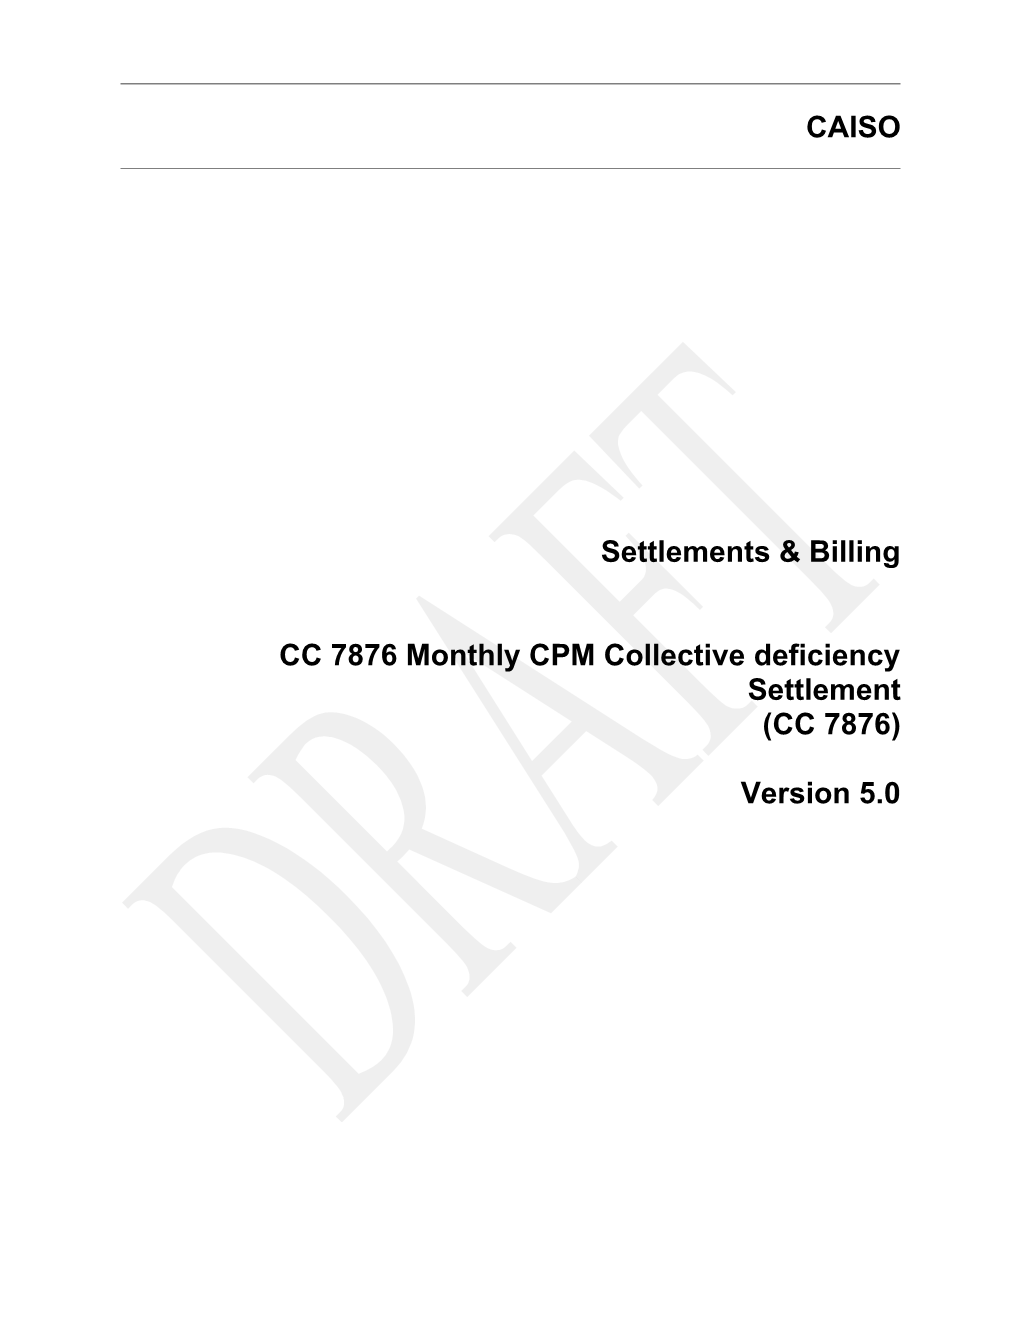 CC 7876 Monthly CPM Collective Deficiency Settlement